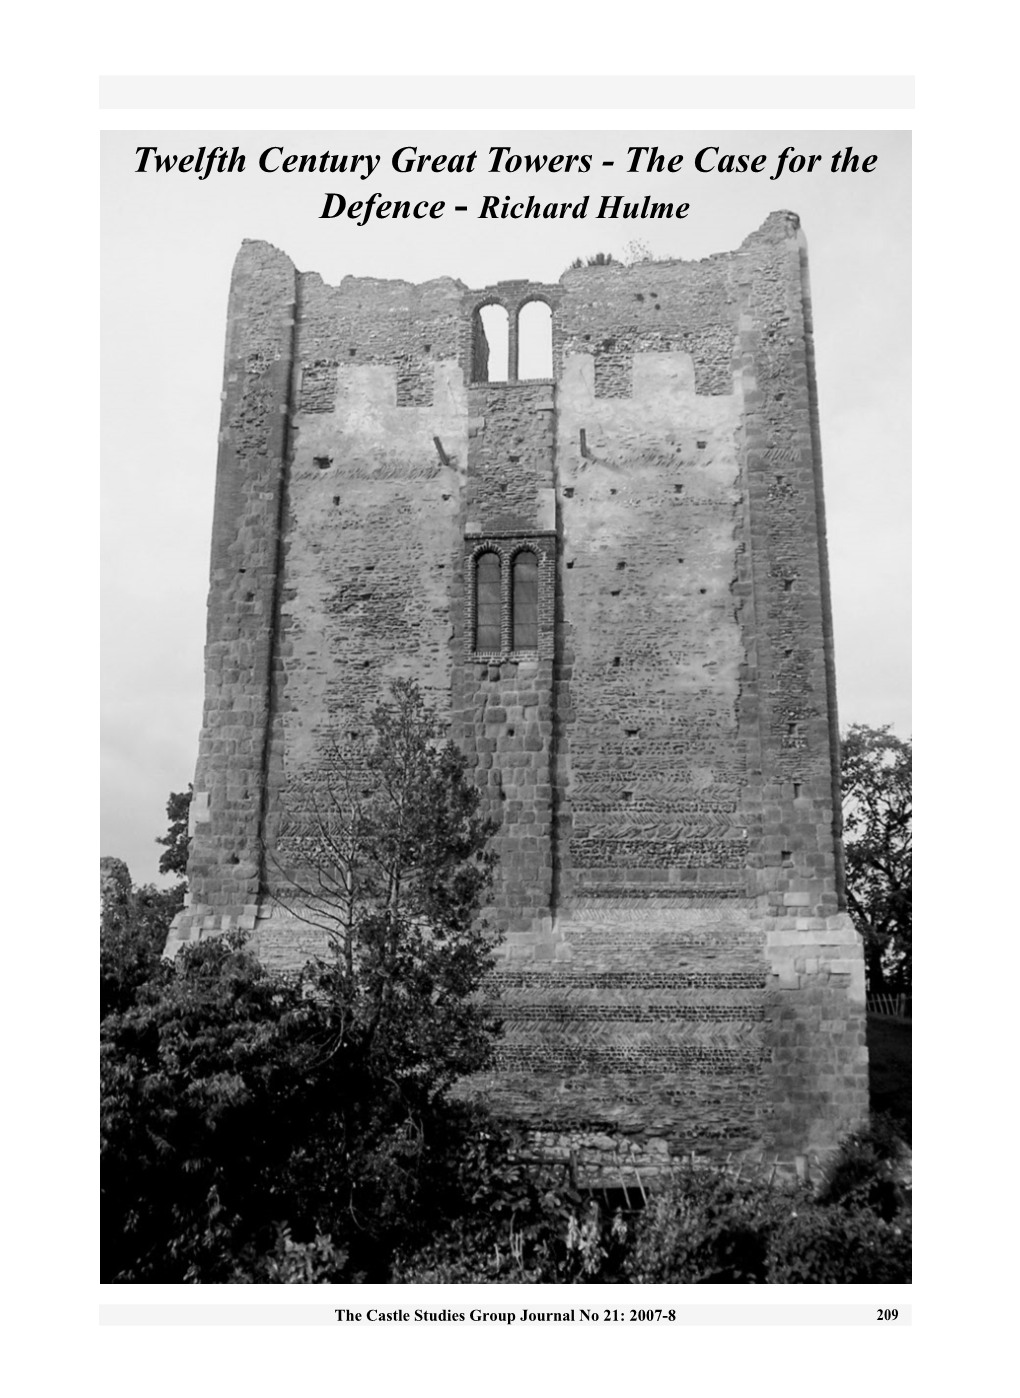 Twelfth Century Great Towers - the Case for the Defence - Richard Hulme